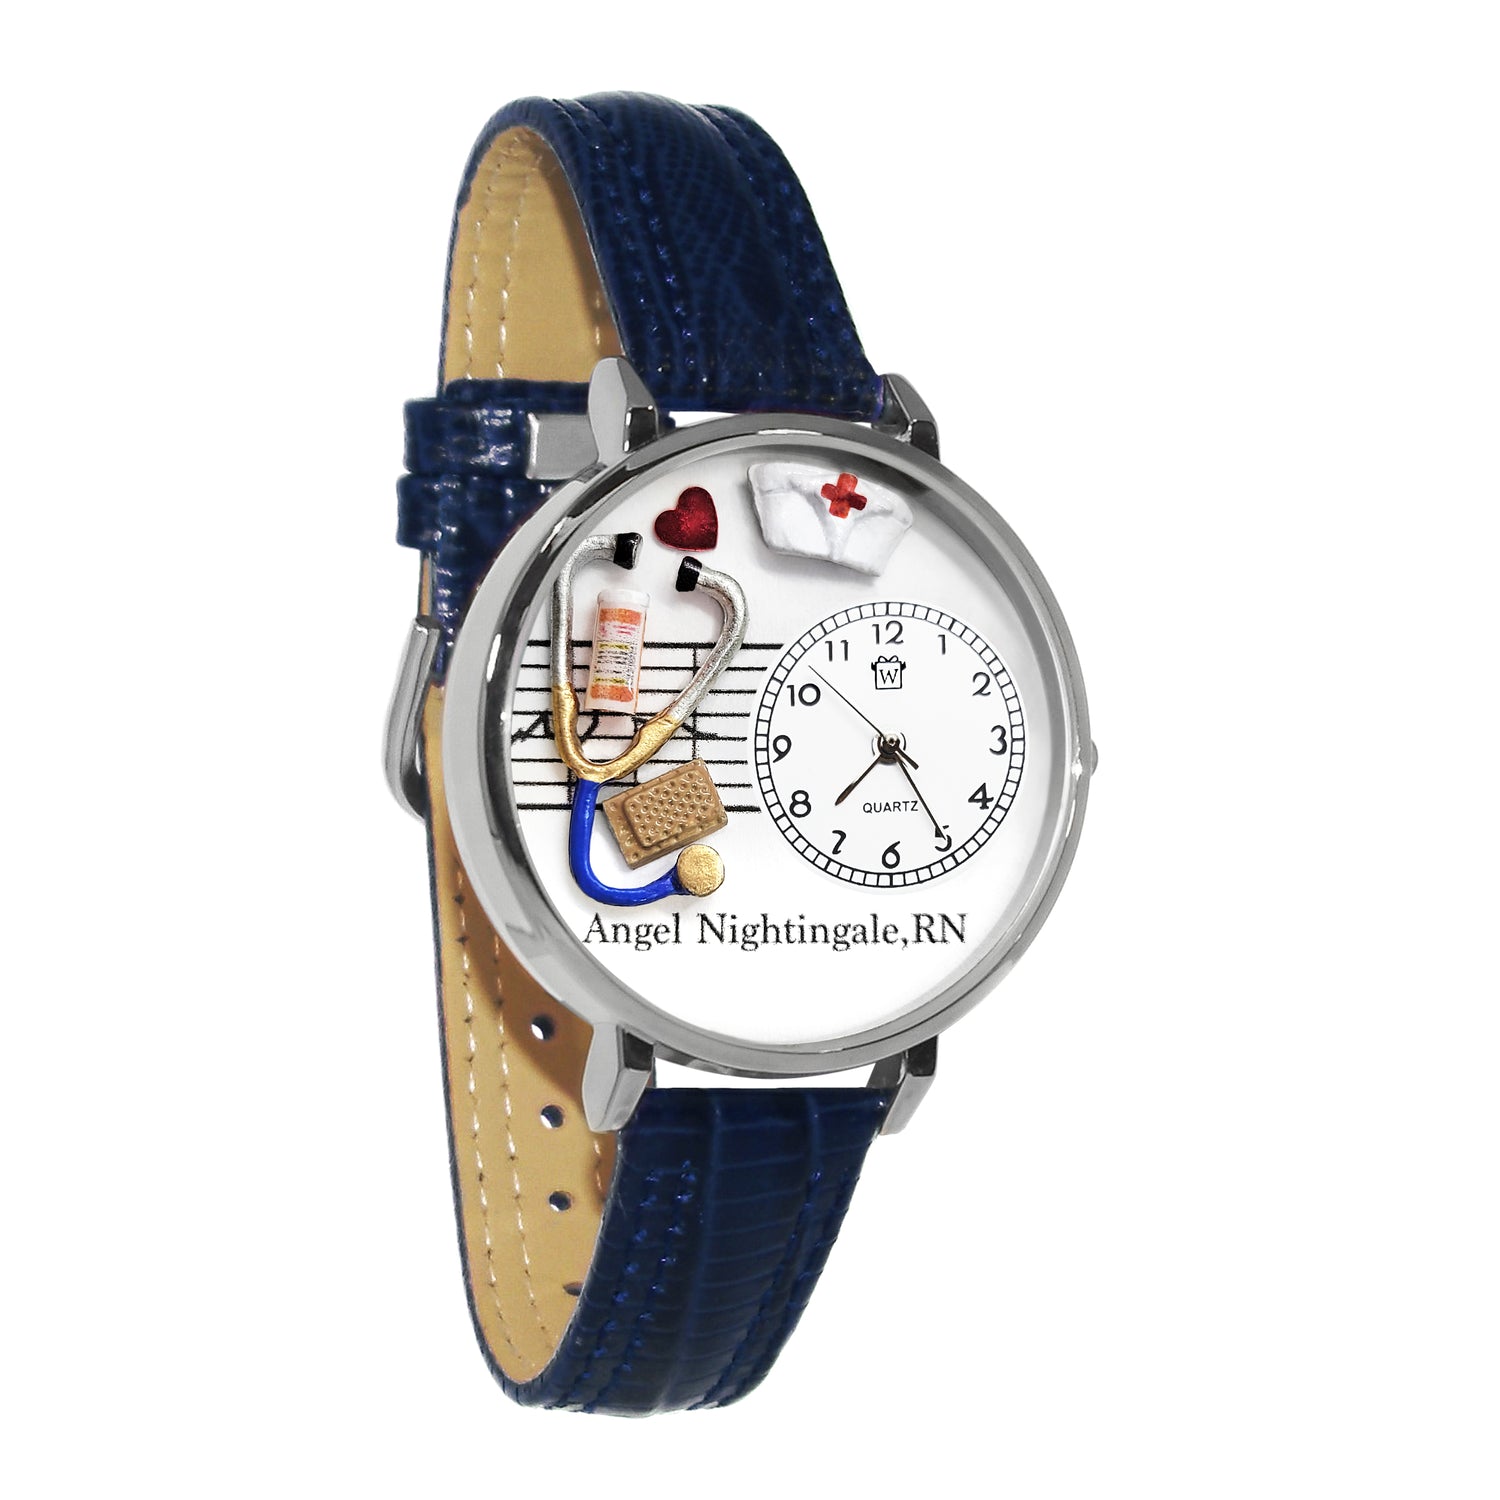 Whimsical Gifts | Personalized Nurse Red Cross 3D Watch Large Style | Handmade in USA | Professions Themed | Nurse | Novelty Unique Fun Miniatures Gift | Silver Finish Navy Blue Leather Watch Band